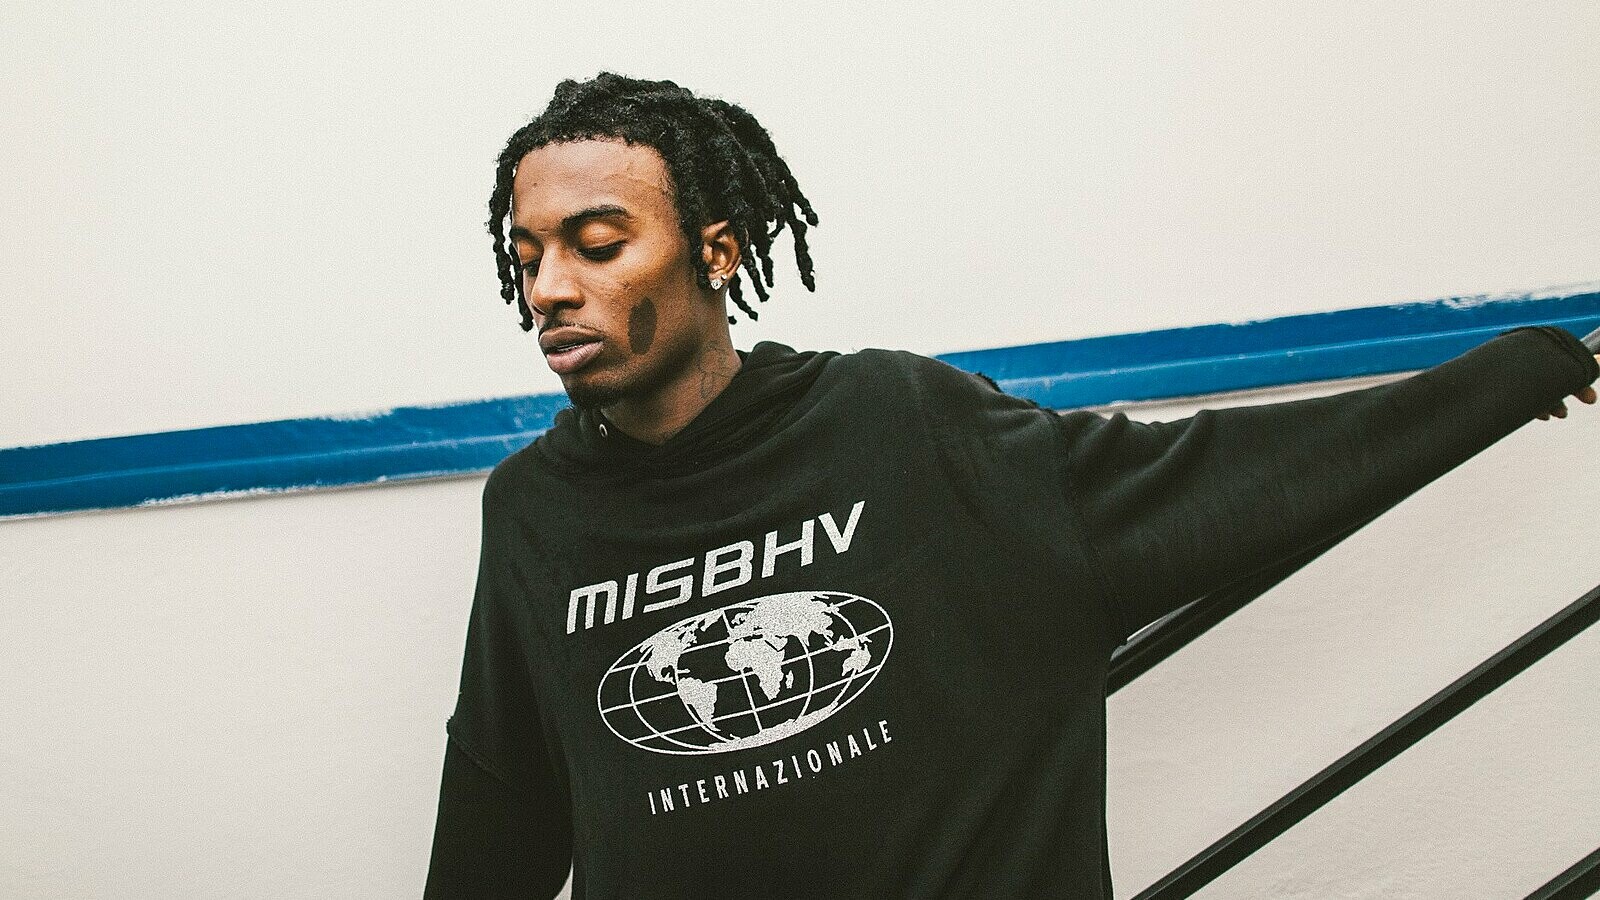 MISBHV - The history of the brand